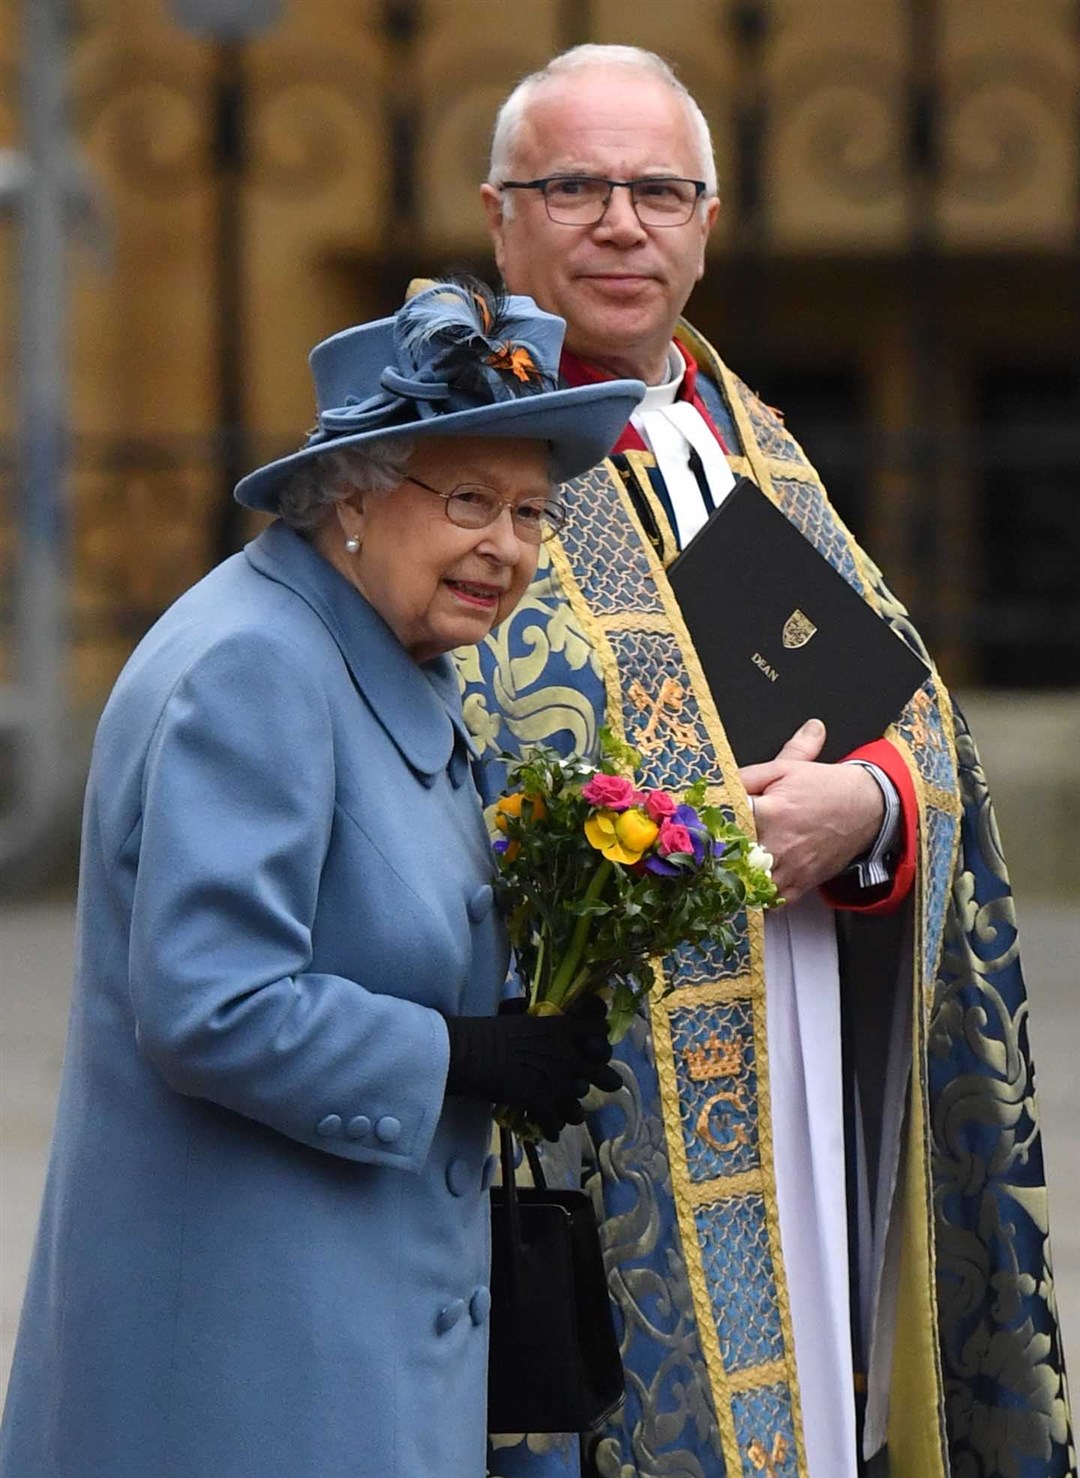 The Queen on Commonwealth Day last year (Dominic Lipinski/PA)